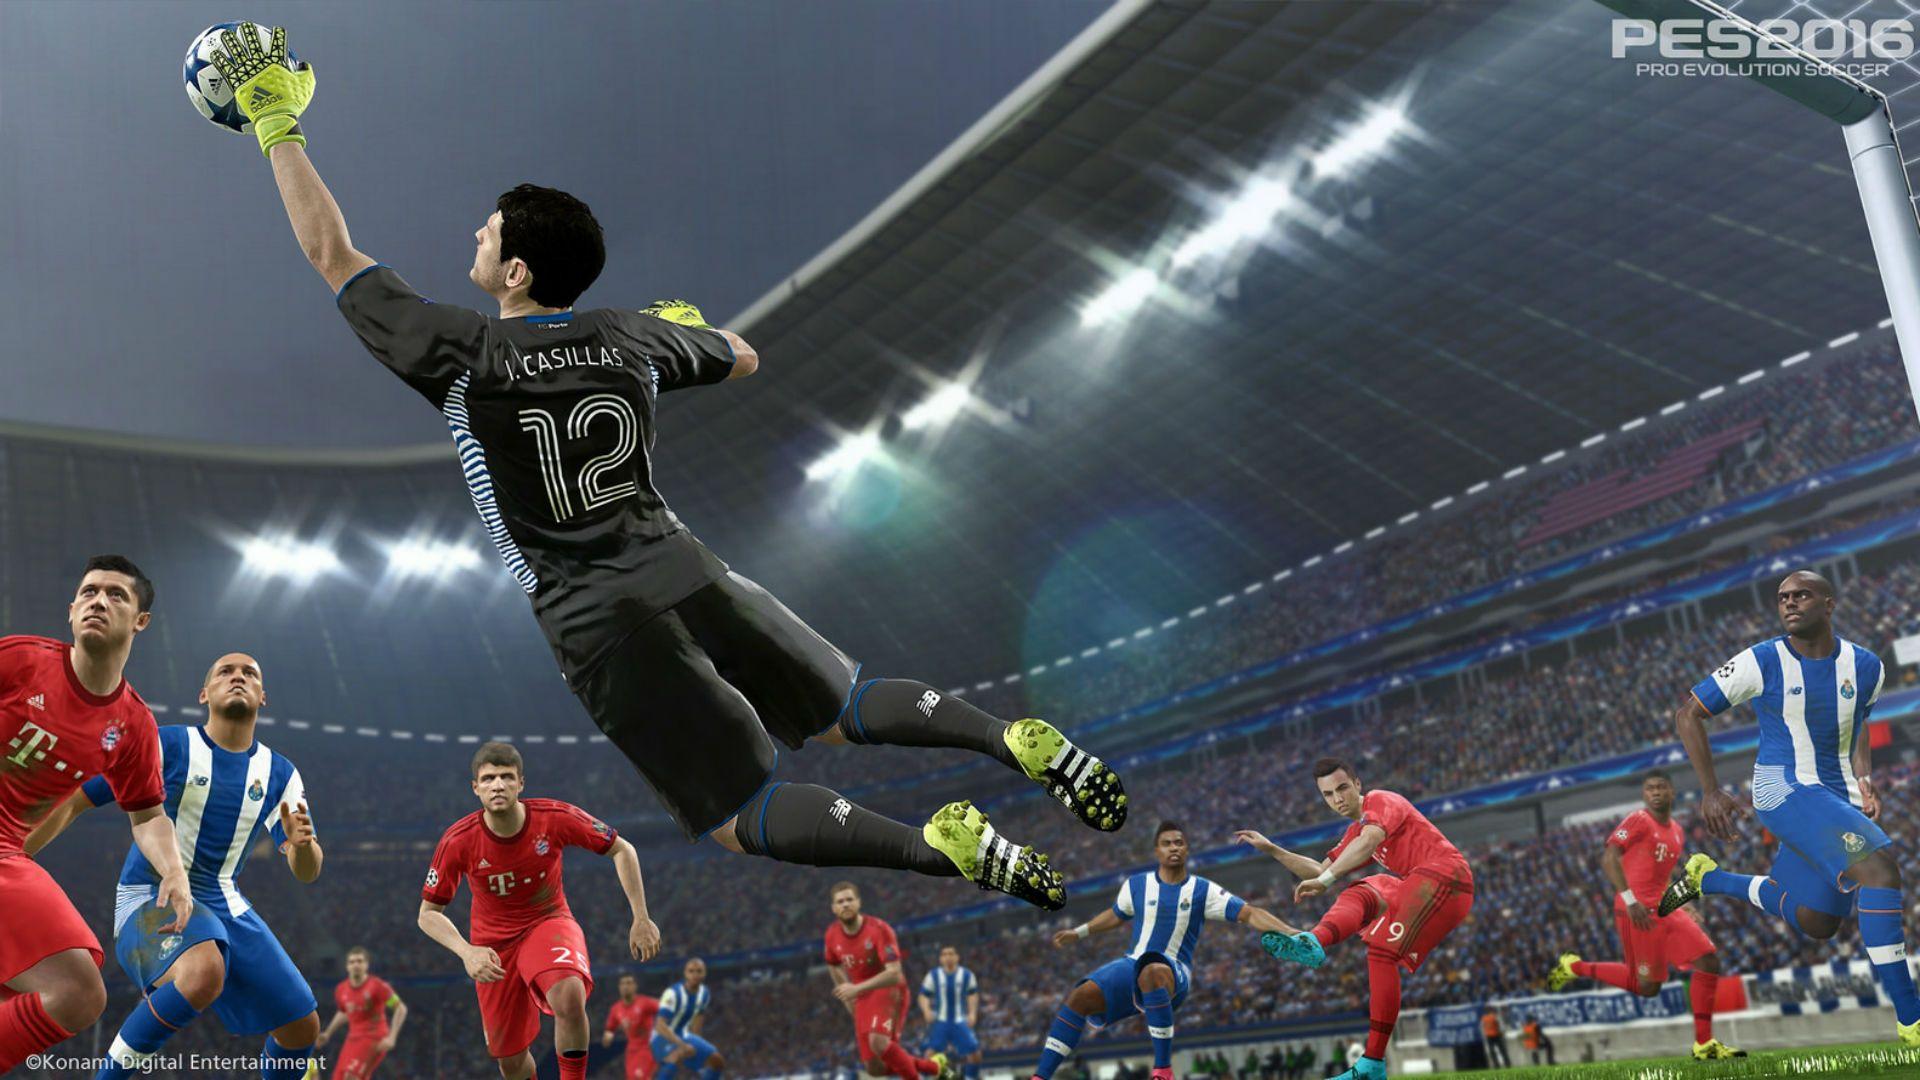 Review: Pro Evolution Soccer 2016 proves underdogs can win